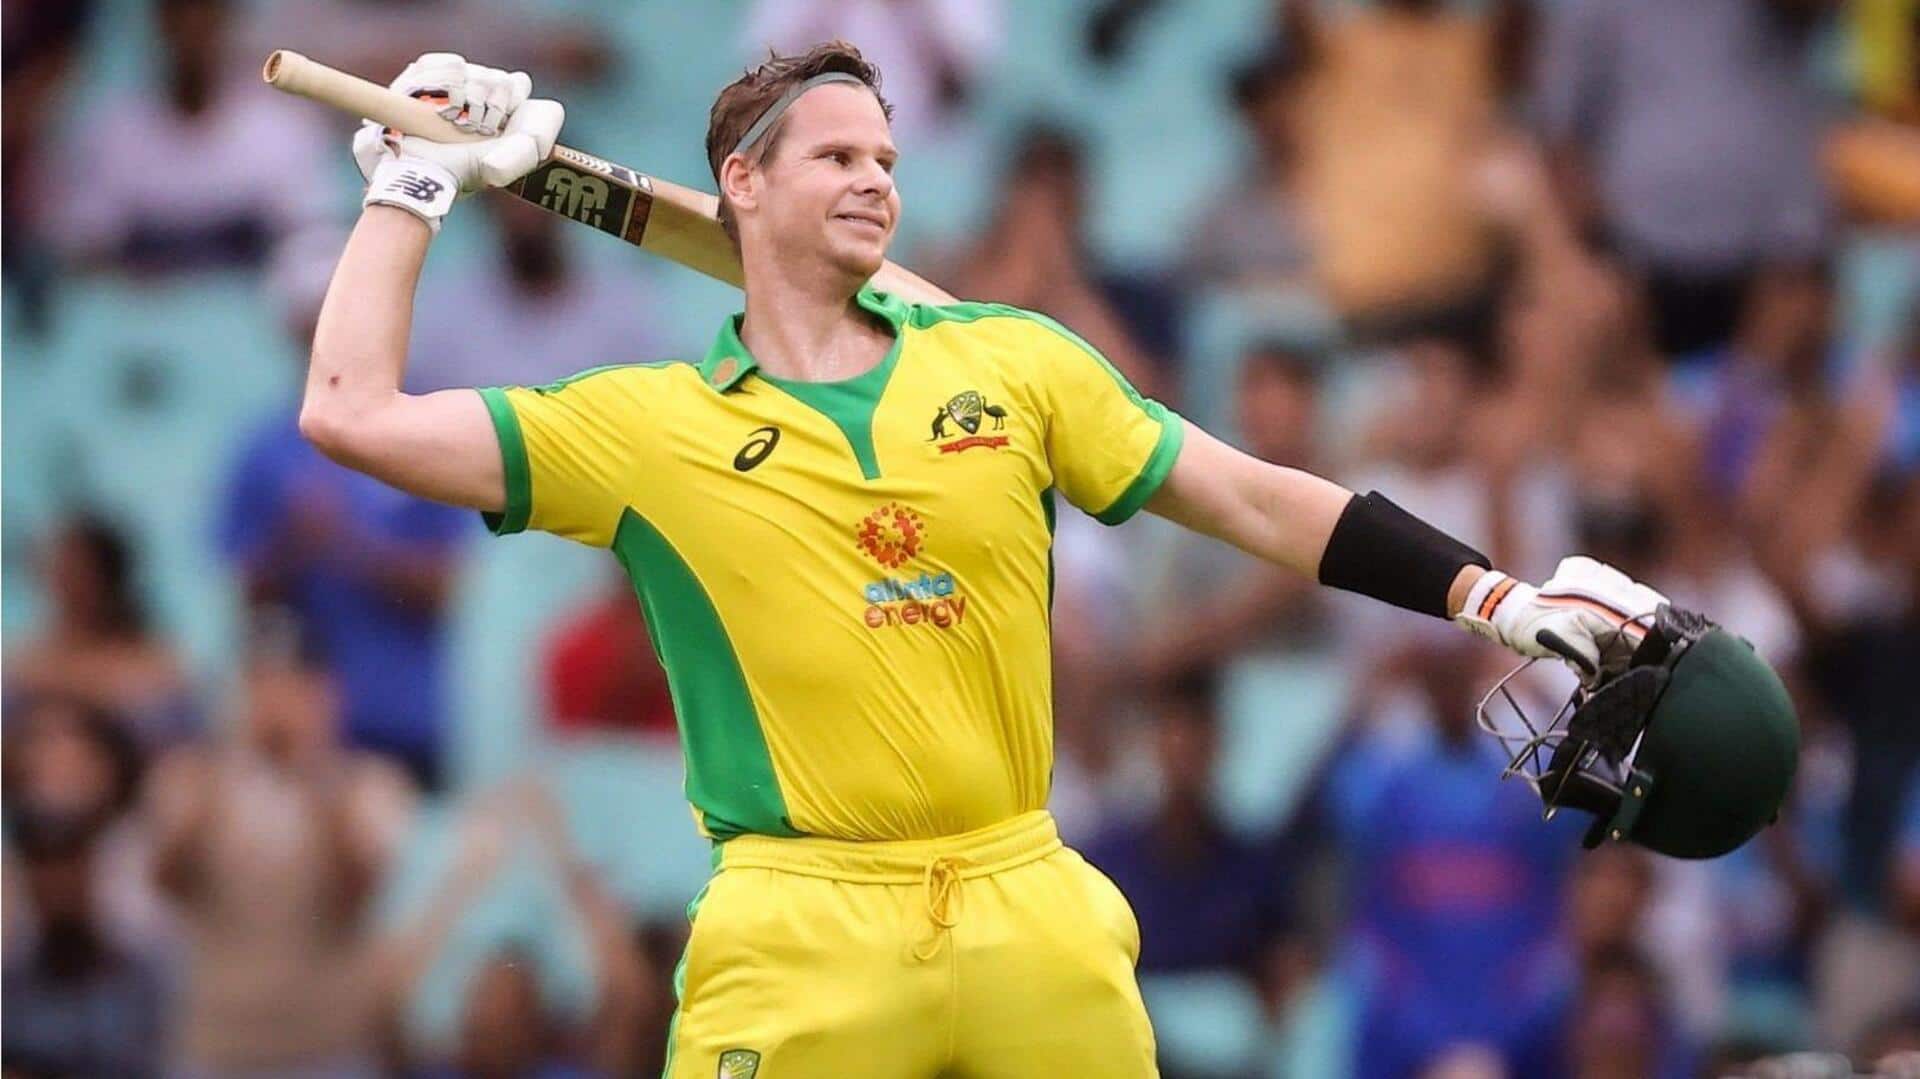 Steve Smith averages 56.80 in home ODIs: Decoding his stats